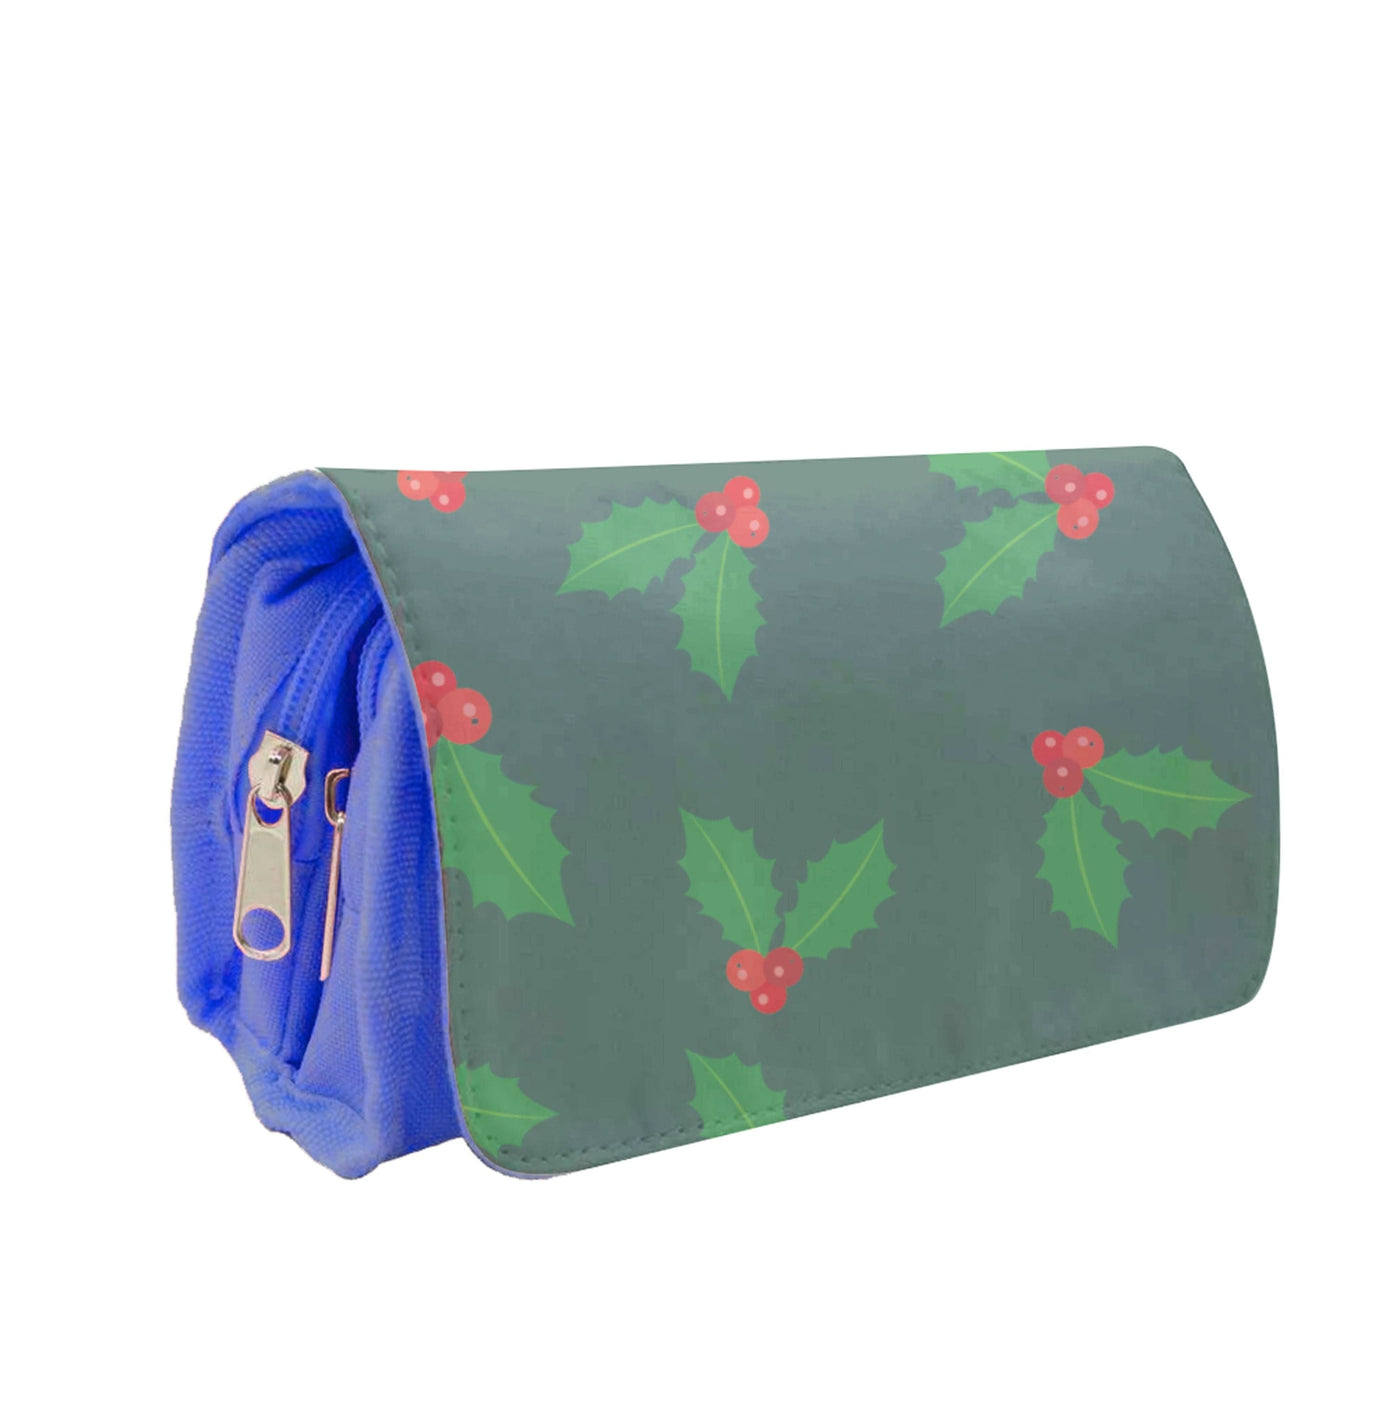 Holly - Christmas Patterns Pencil Case